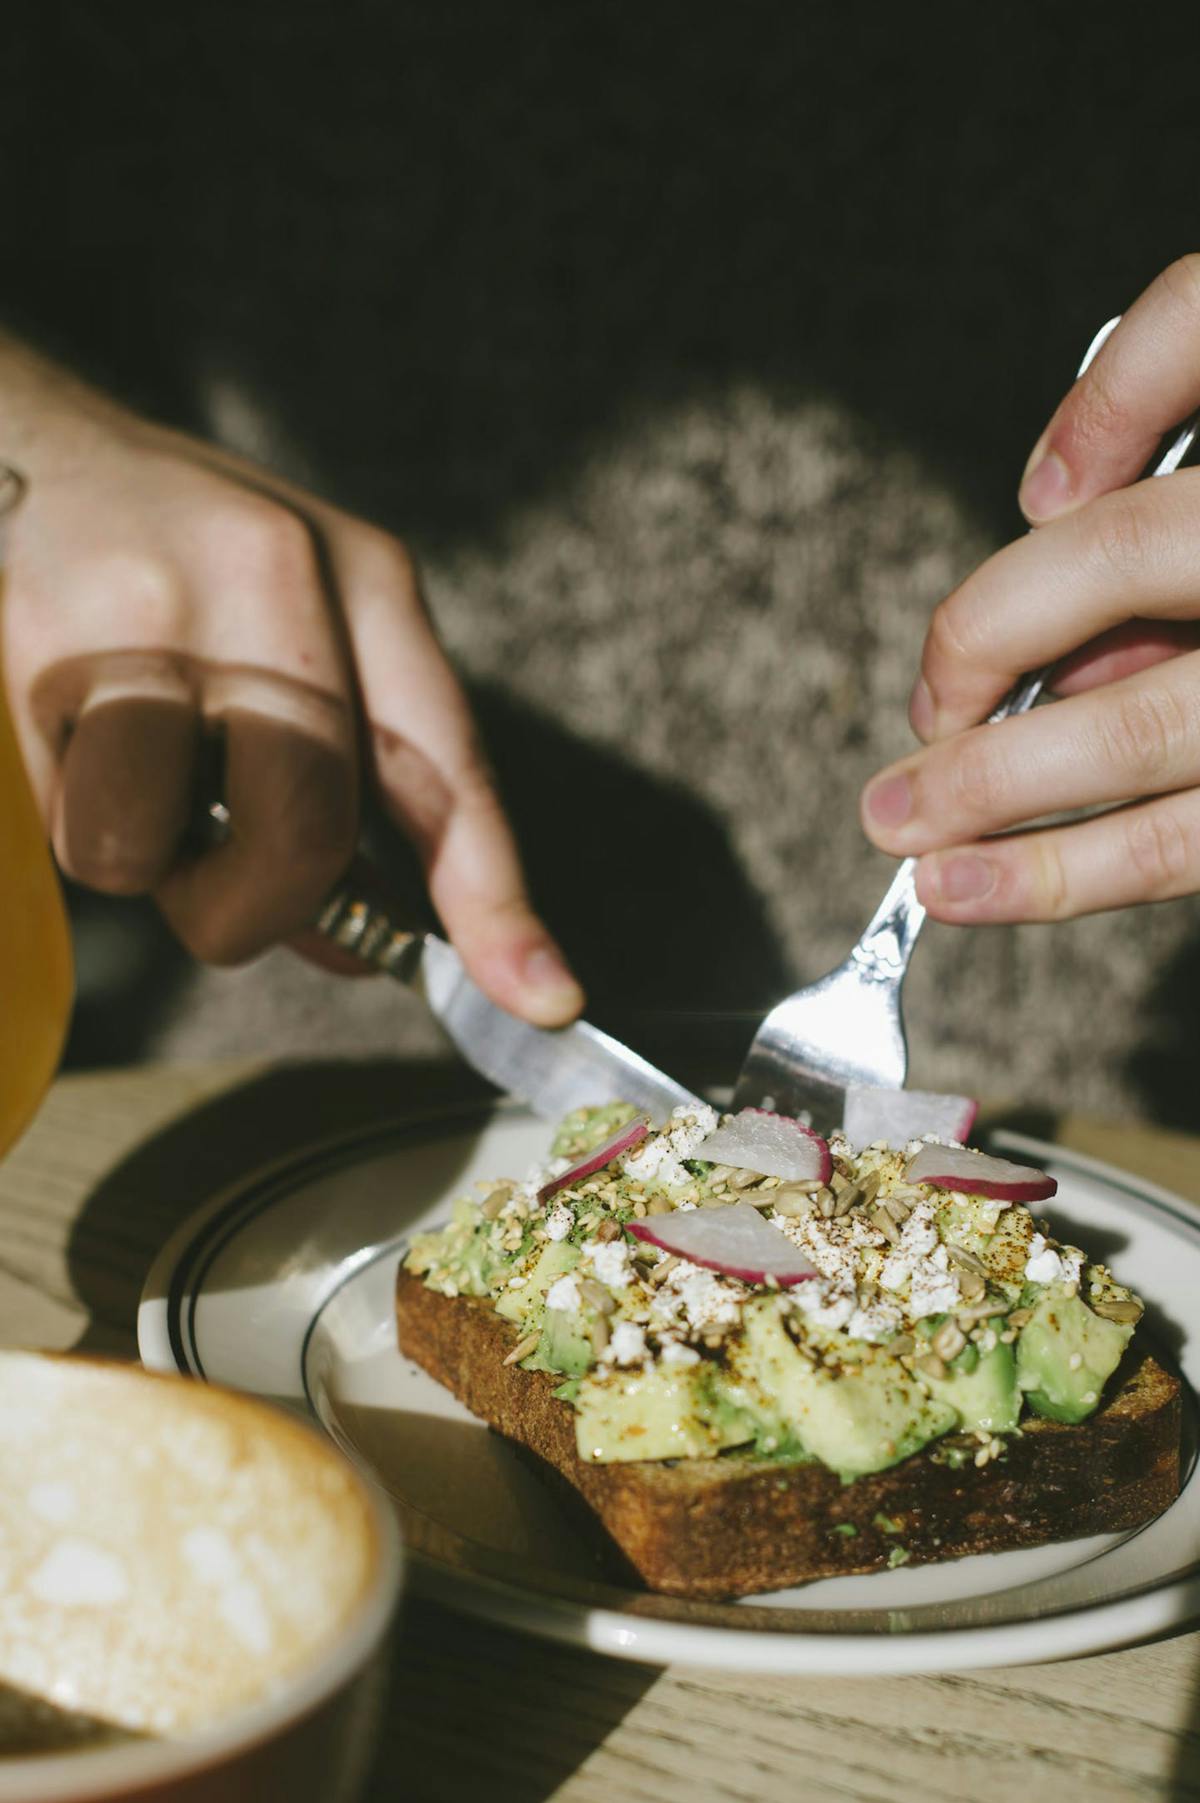 a close up of a person cutting a piece of bread on a plate